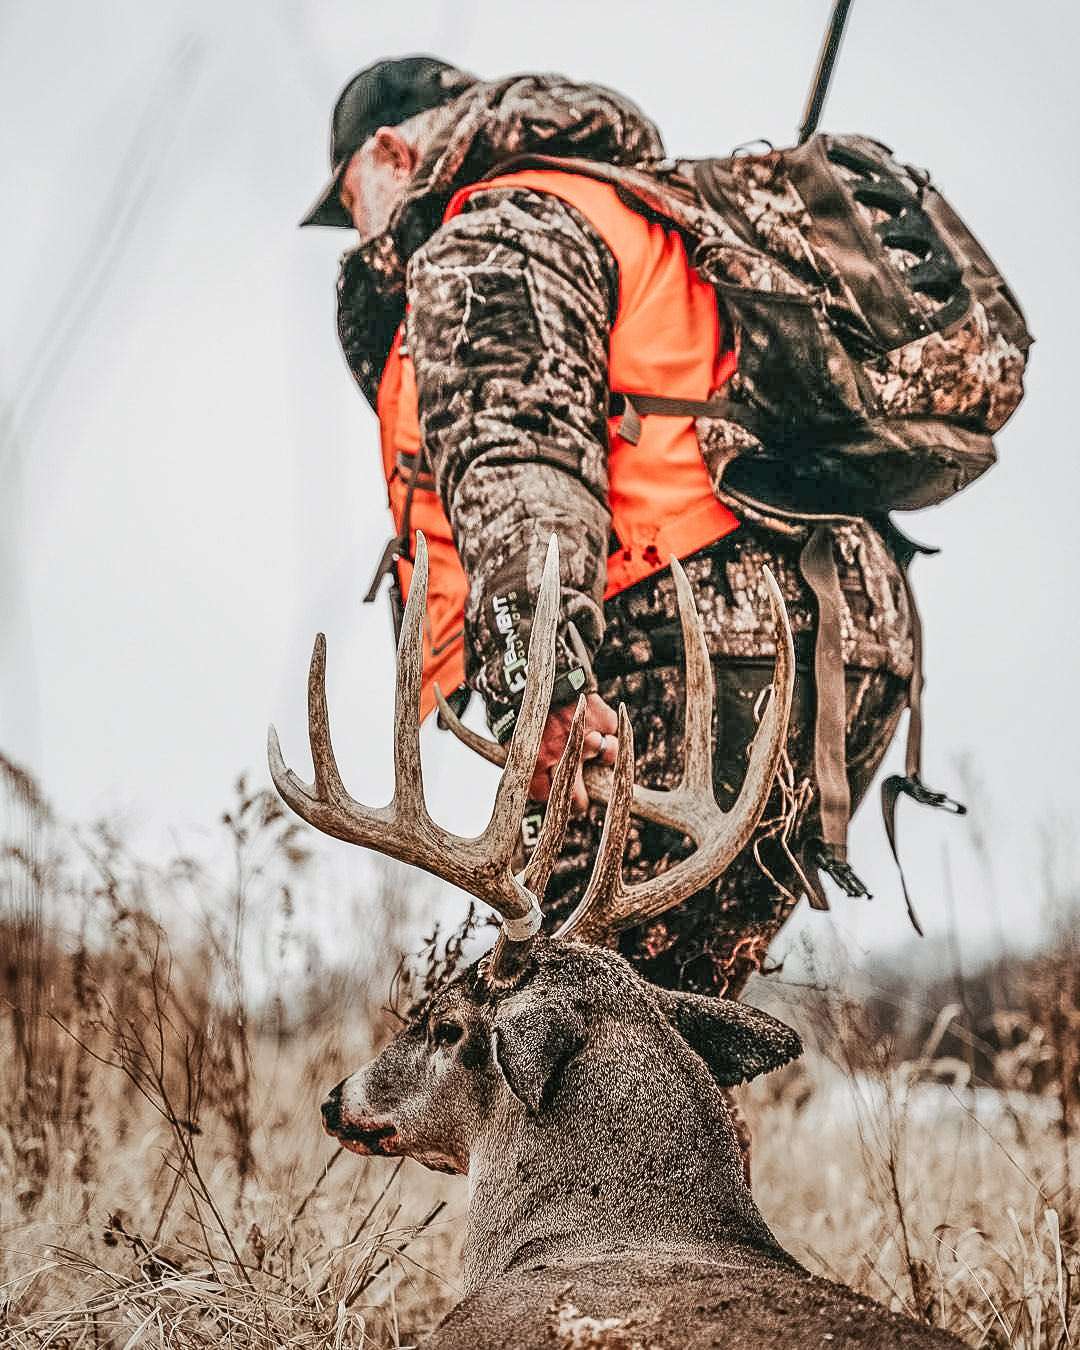 A 300-yard shot with a muzzleloader was once unheard of. Not anymore. Image by Small Town Hunting